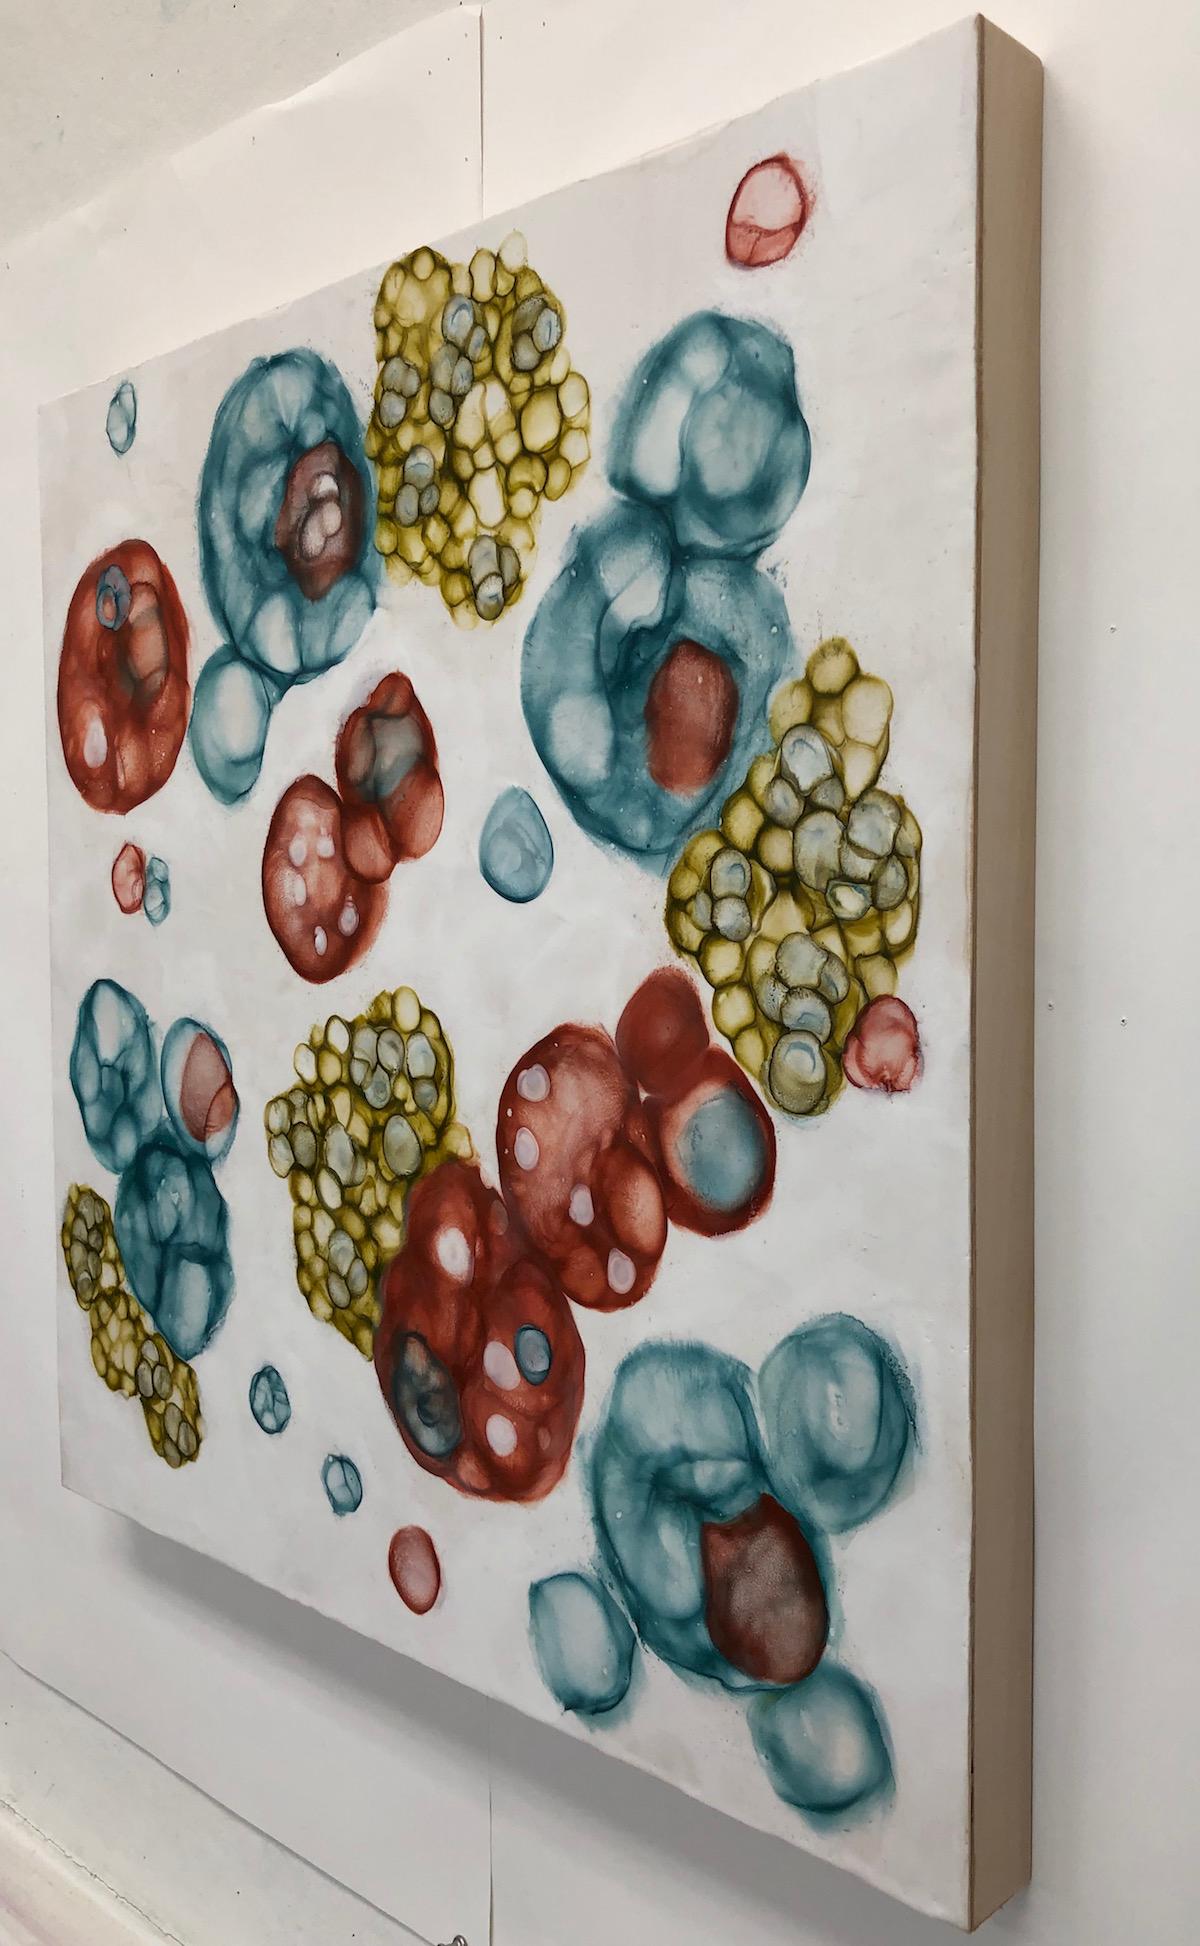 Kay Hartung’s “Bio Flow 23” is a 24 x 24 x 1.5 inch encaustic painting depicting floating microscopic forms. In colors of teal, rust, yellow green, and white, the composition creates a sense of the growth and movement of cells. The painting is